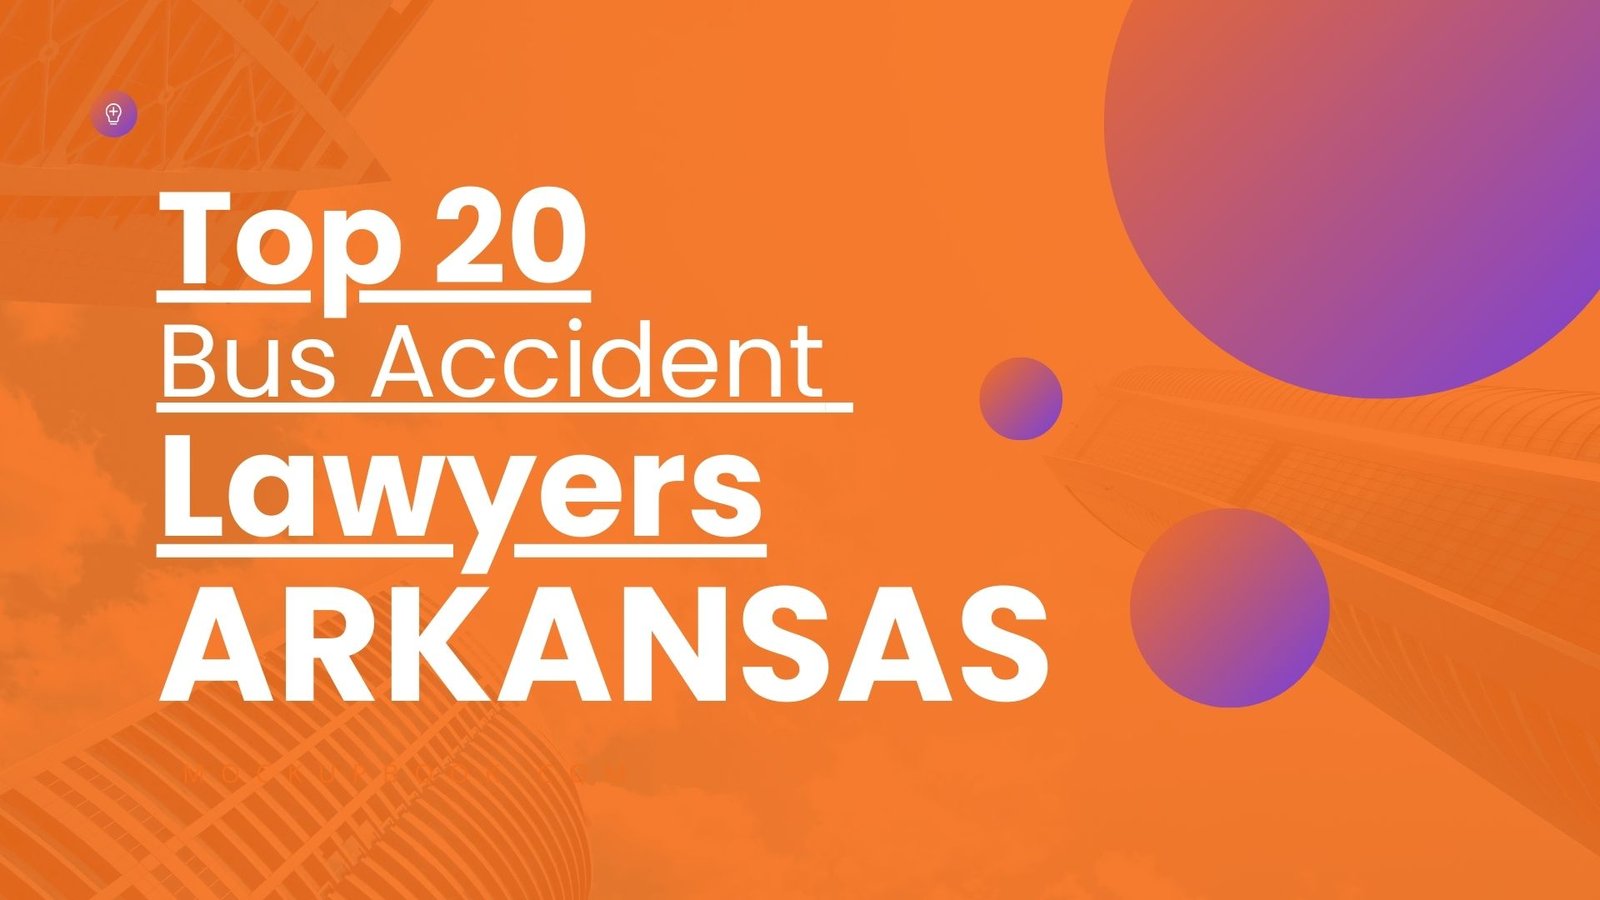 Top 20 Bus Accident Lawyers in Arkansas